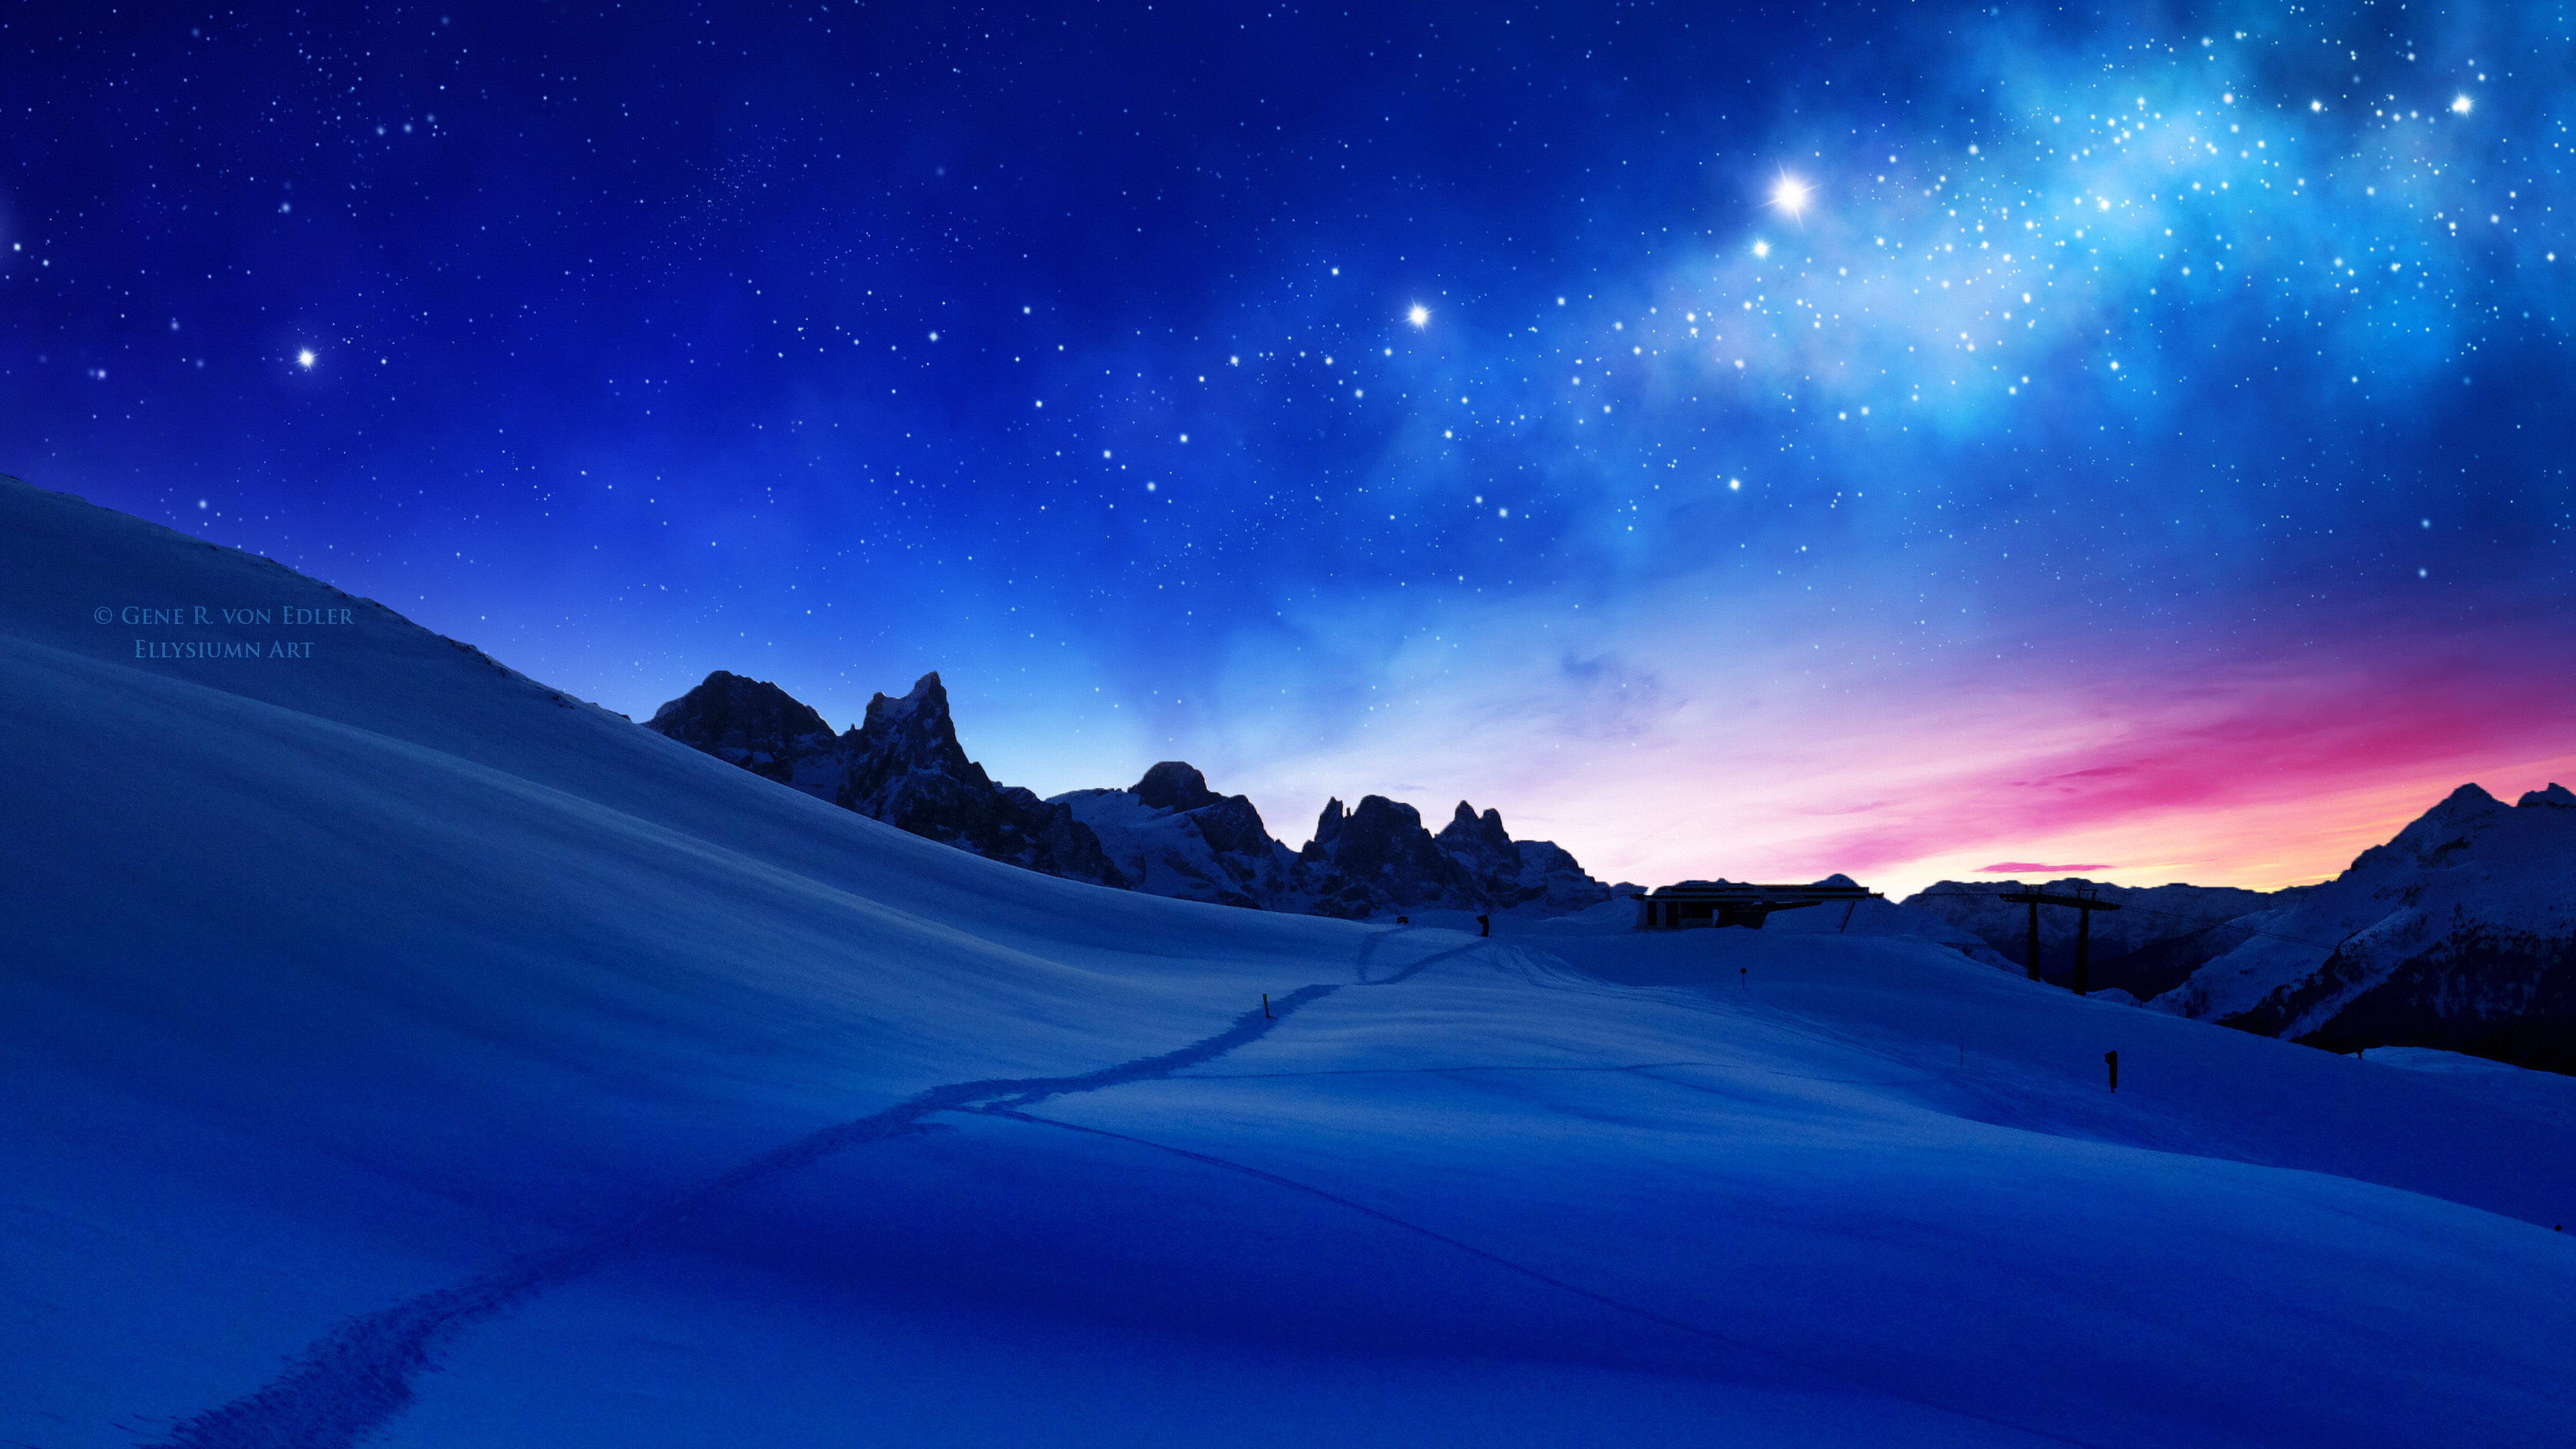 Sunset Chrome Os Stock Wallpapers